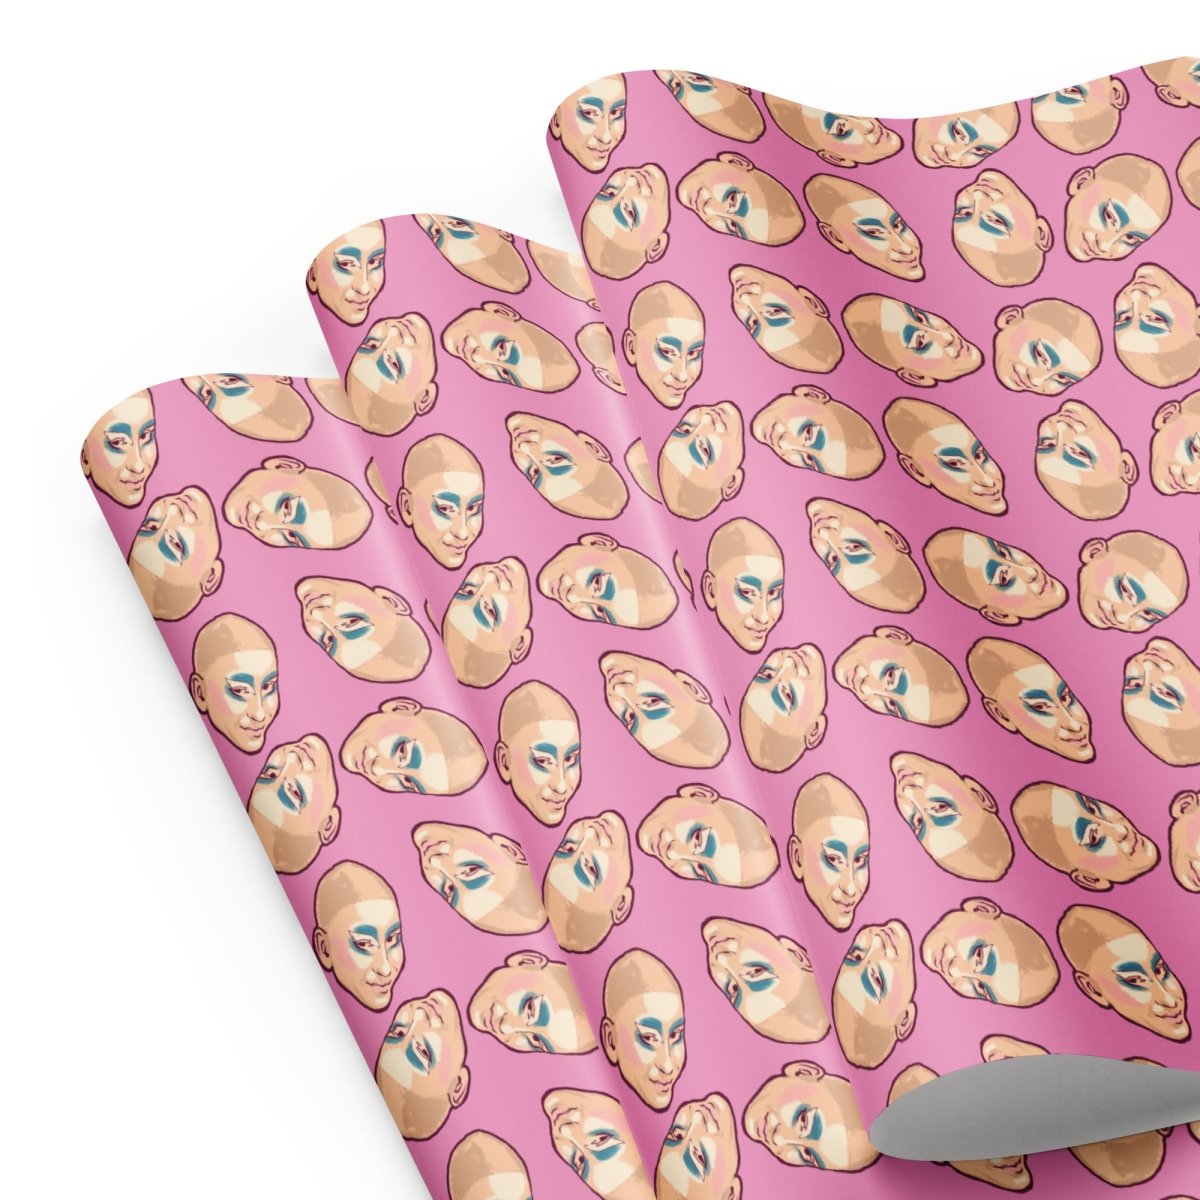 Trixie Mattel - Floating Heads Wrapping paper sheets - dragqueenmerch